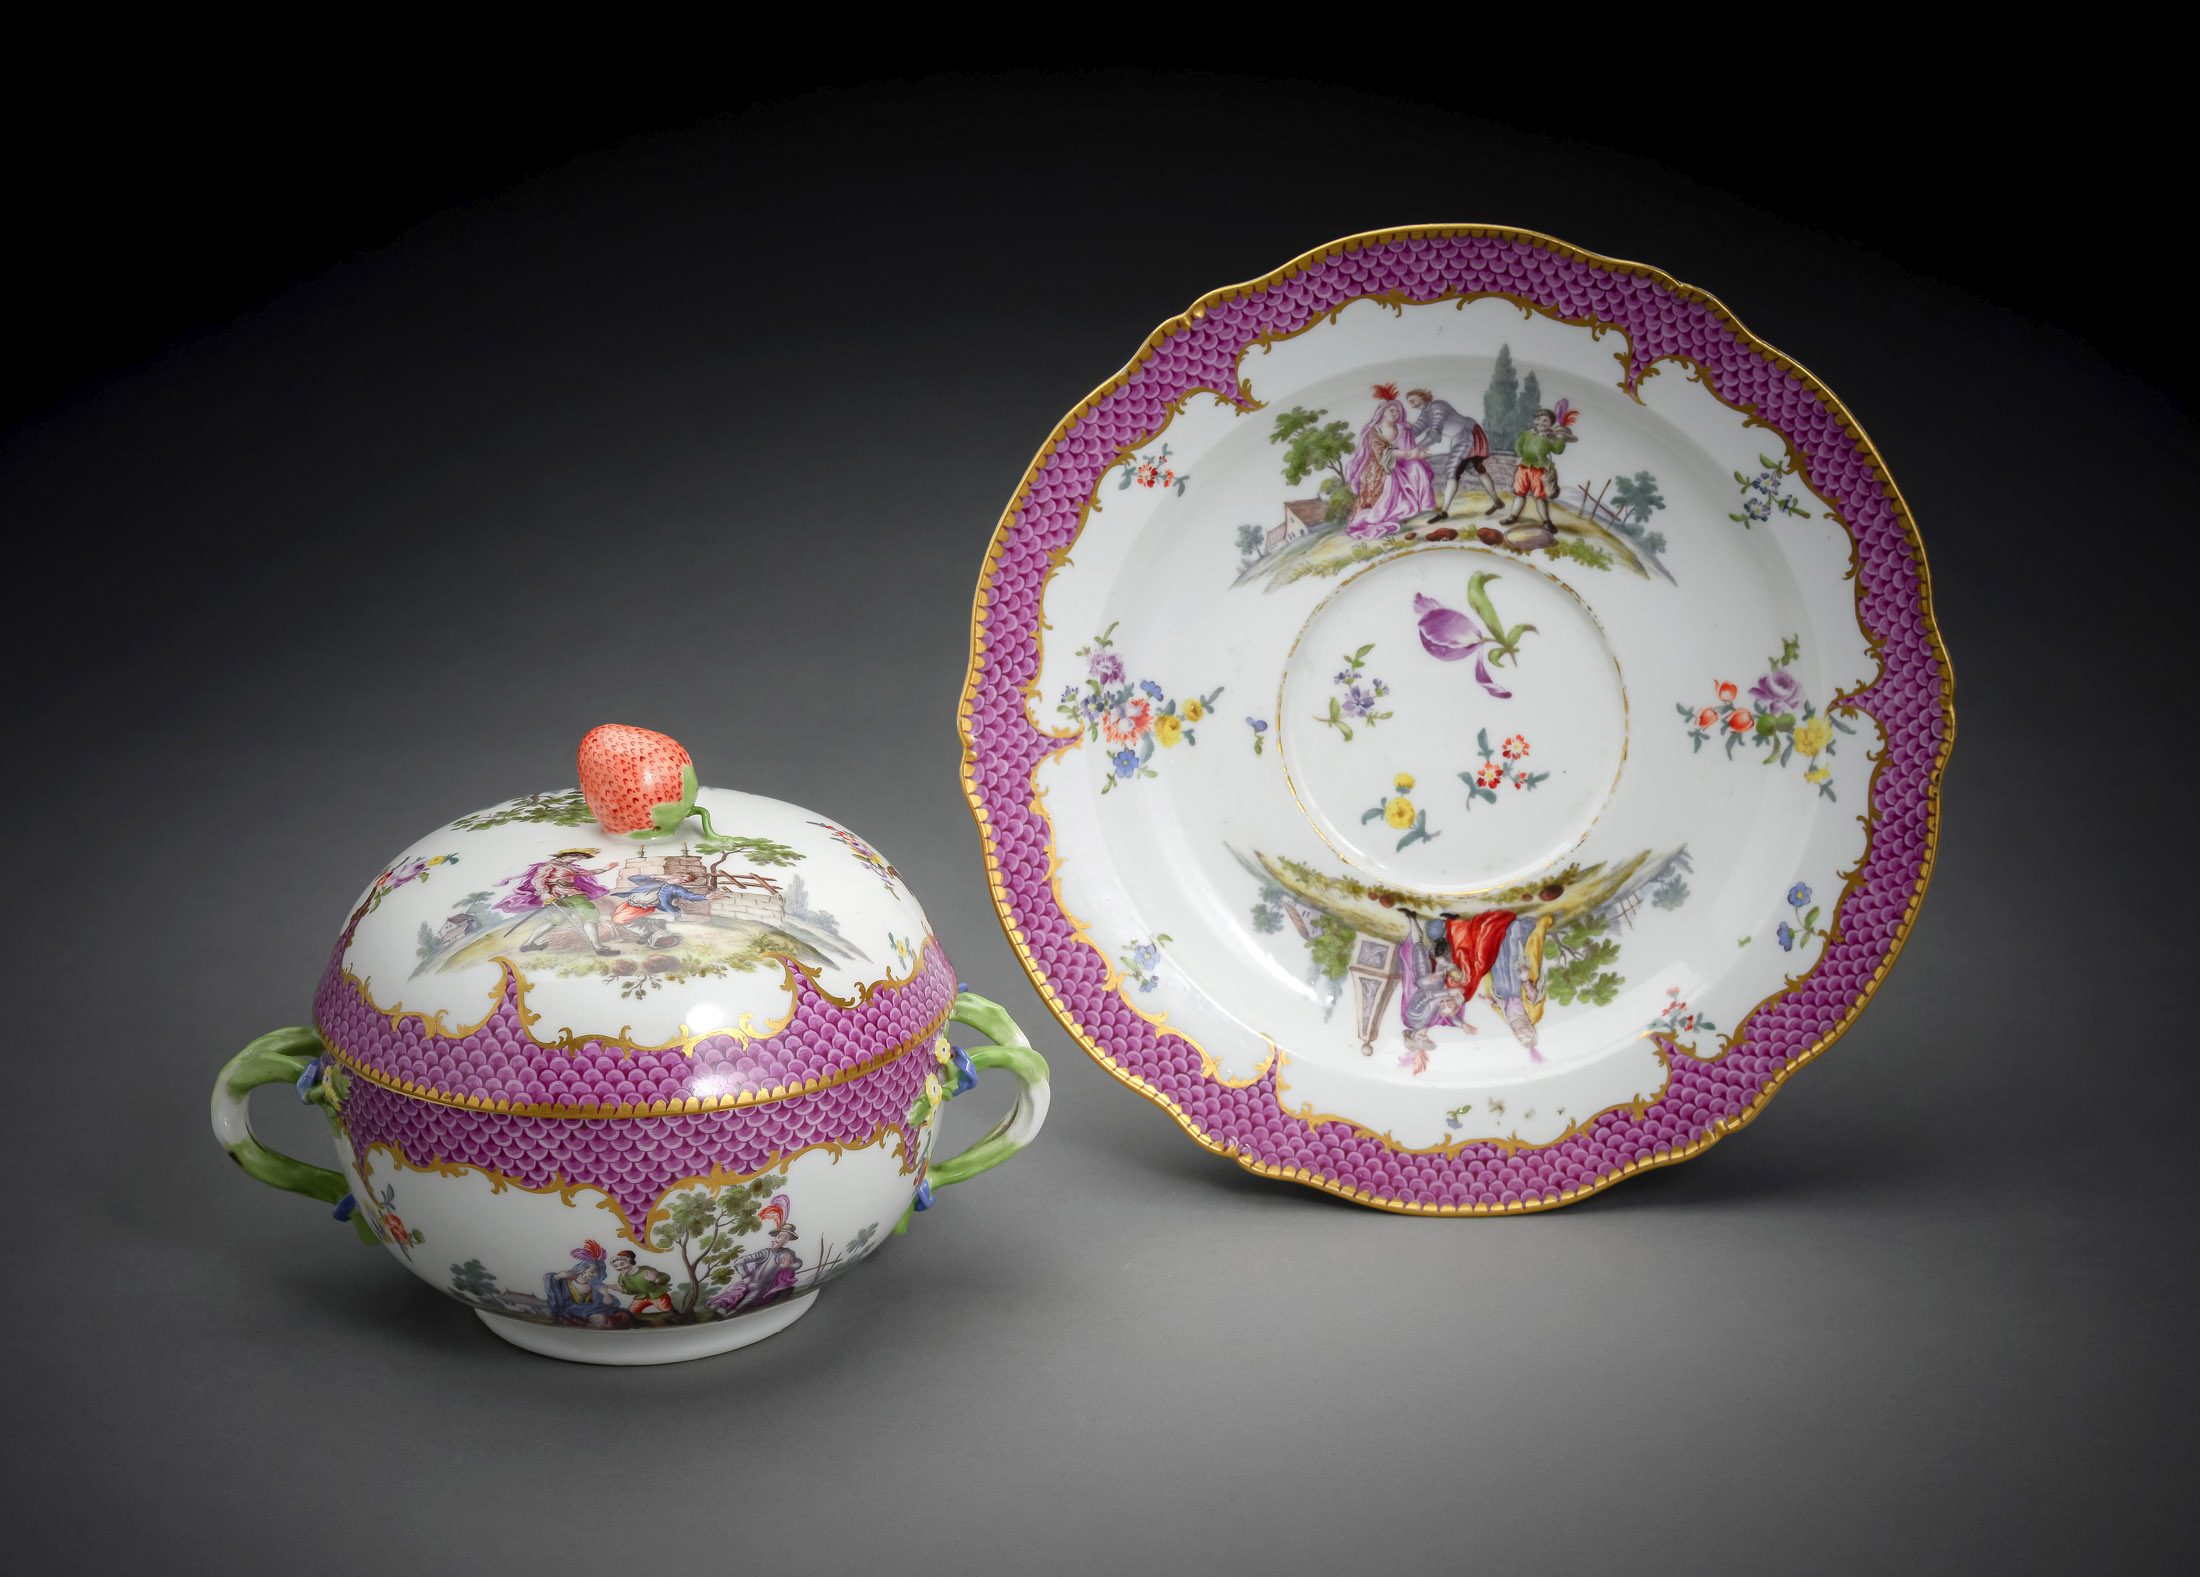 A FINE MEISSEN PORCELAIN ECUELLE WITH COVER AND DISH